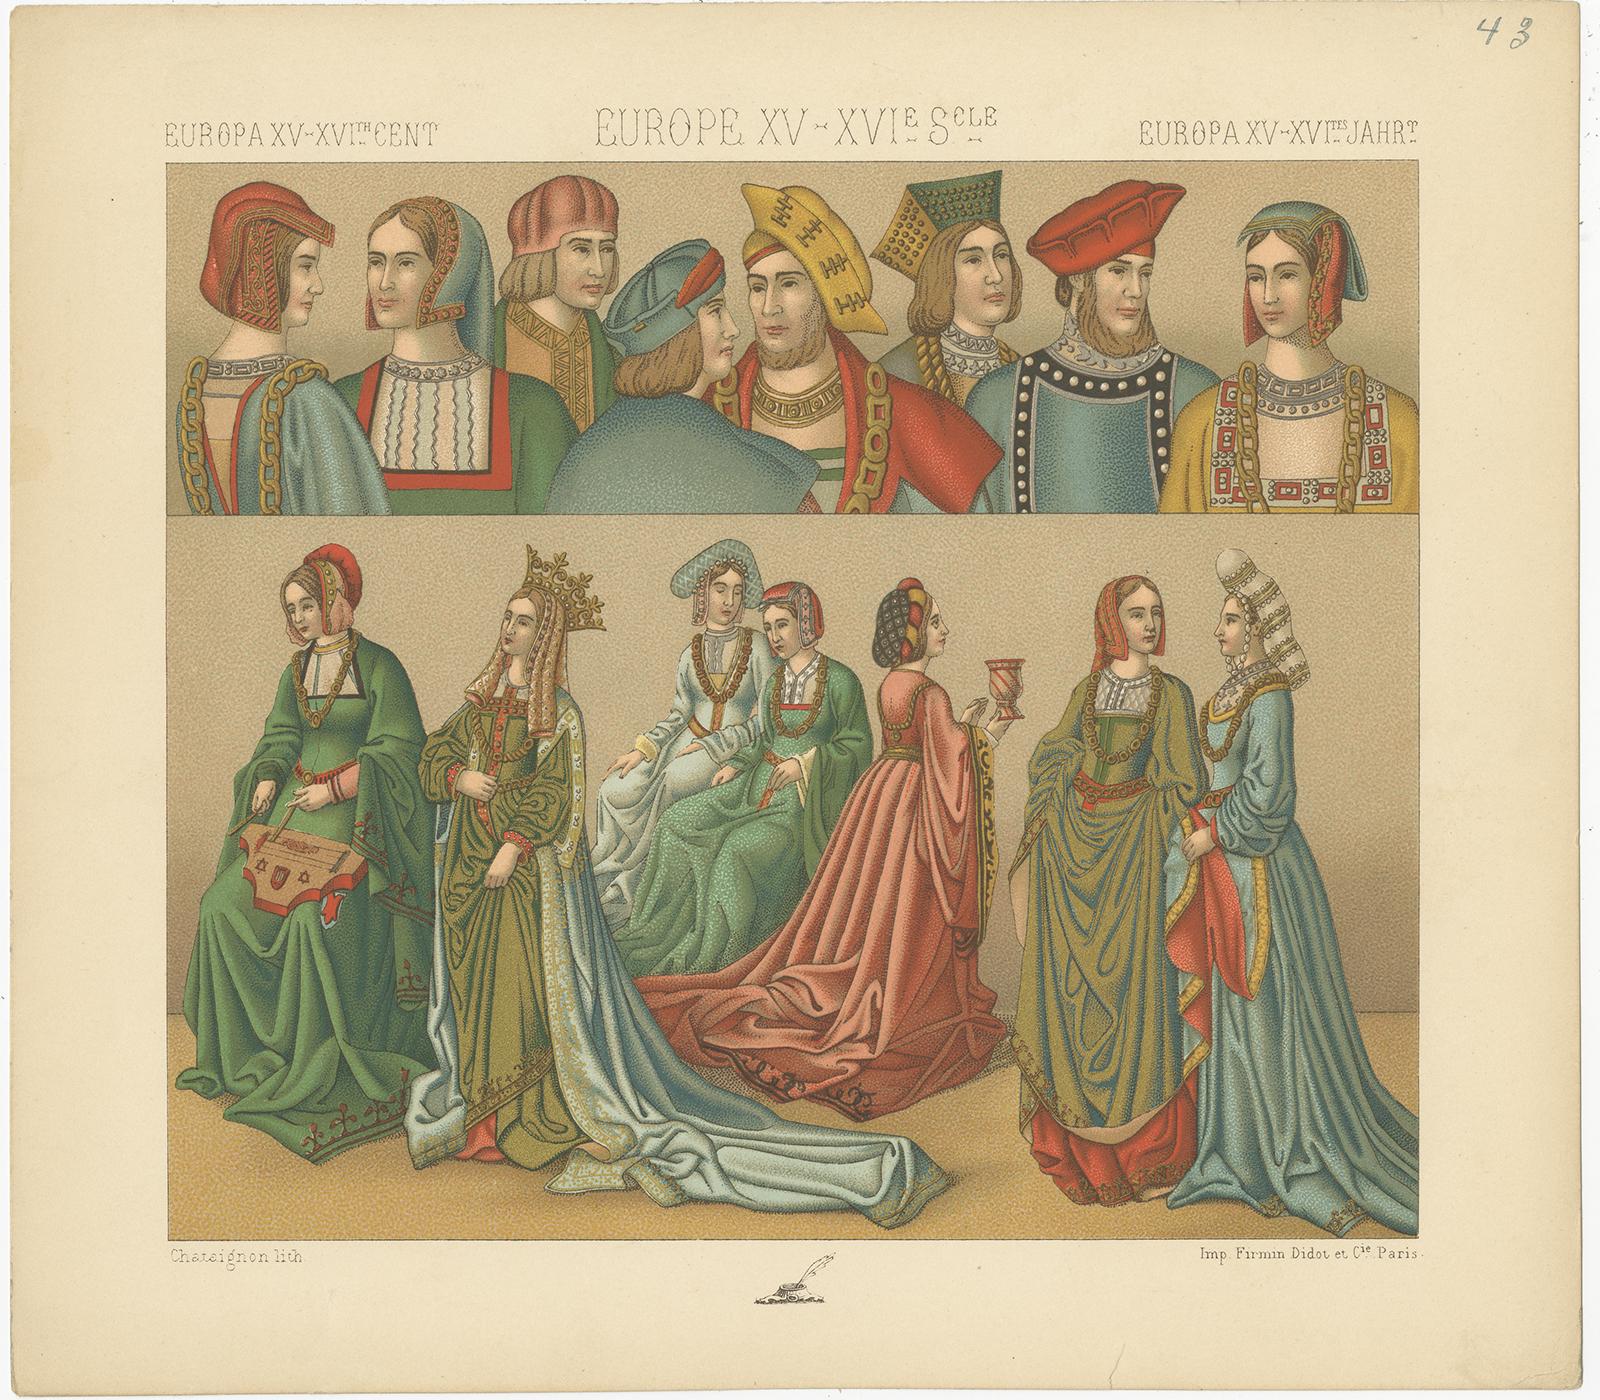 Antique print titled 'Europa XV-XVIth Cent - Europe XV-XVIe, Sele - Europa XV-XVItes Jahr'. Chromolithograph of European 15th-16th century costumes. This print originates from 'Le Costume Historique' by M.A. Racinet. Published circa 1880.